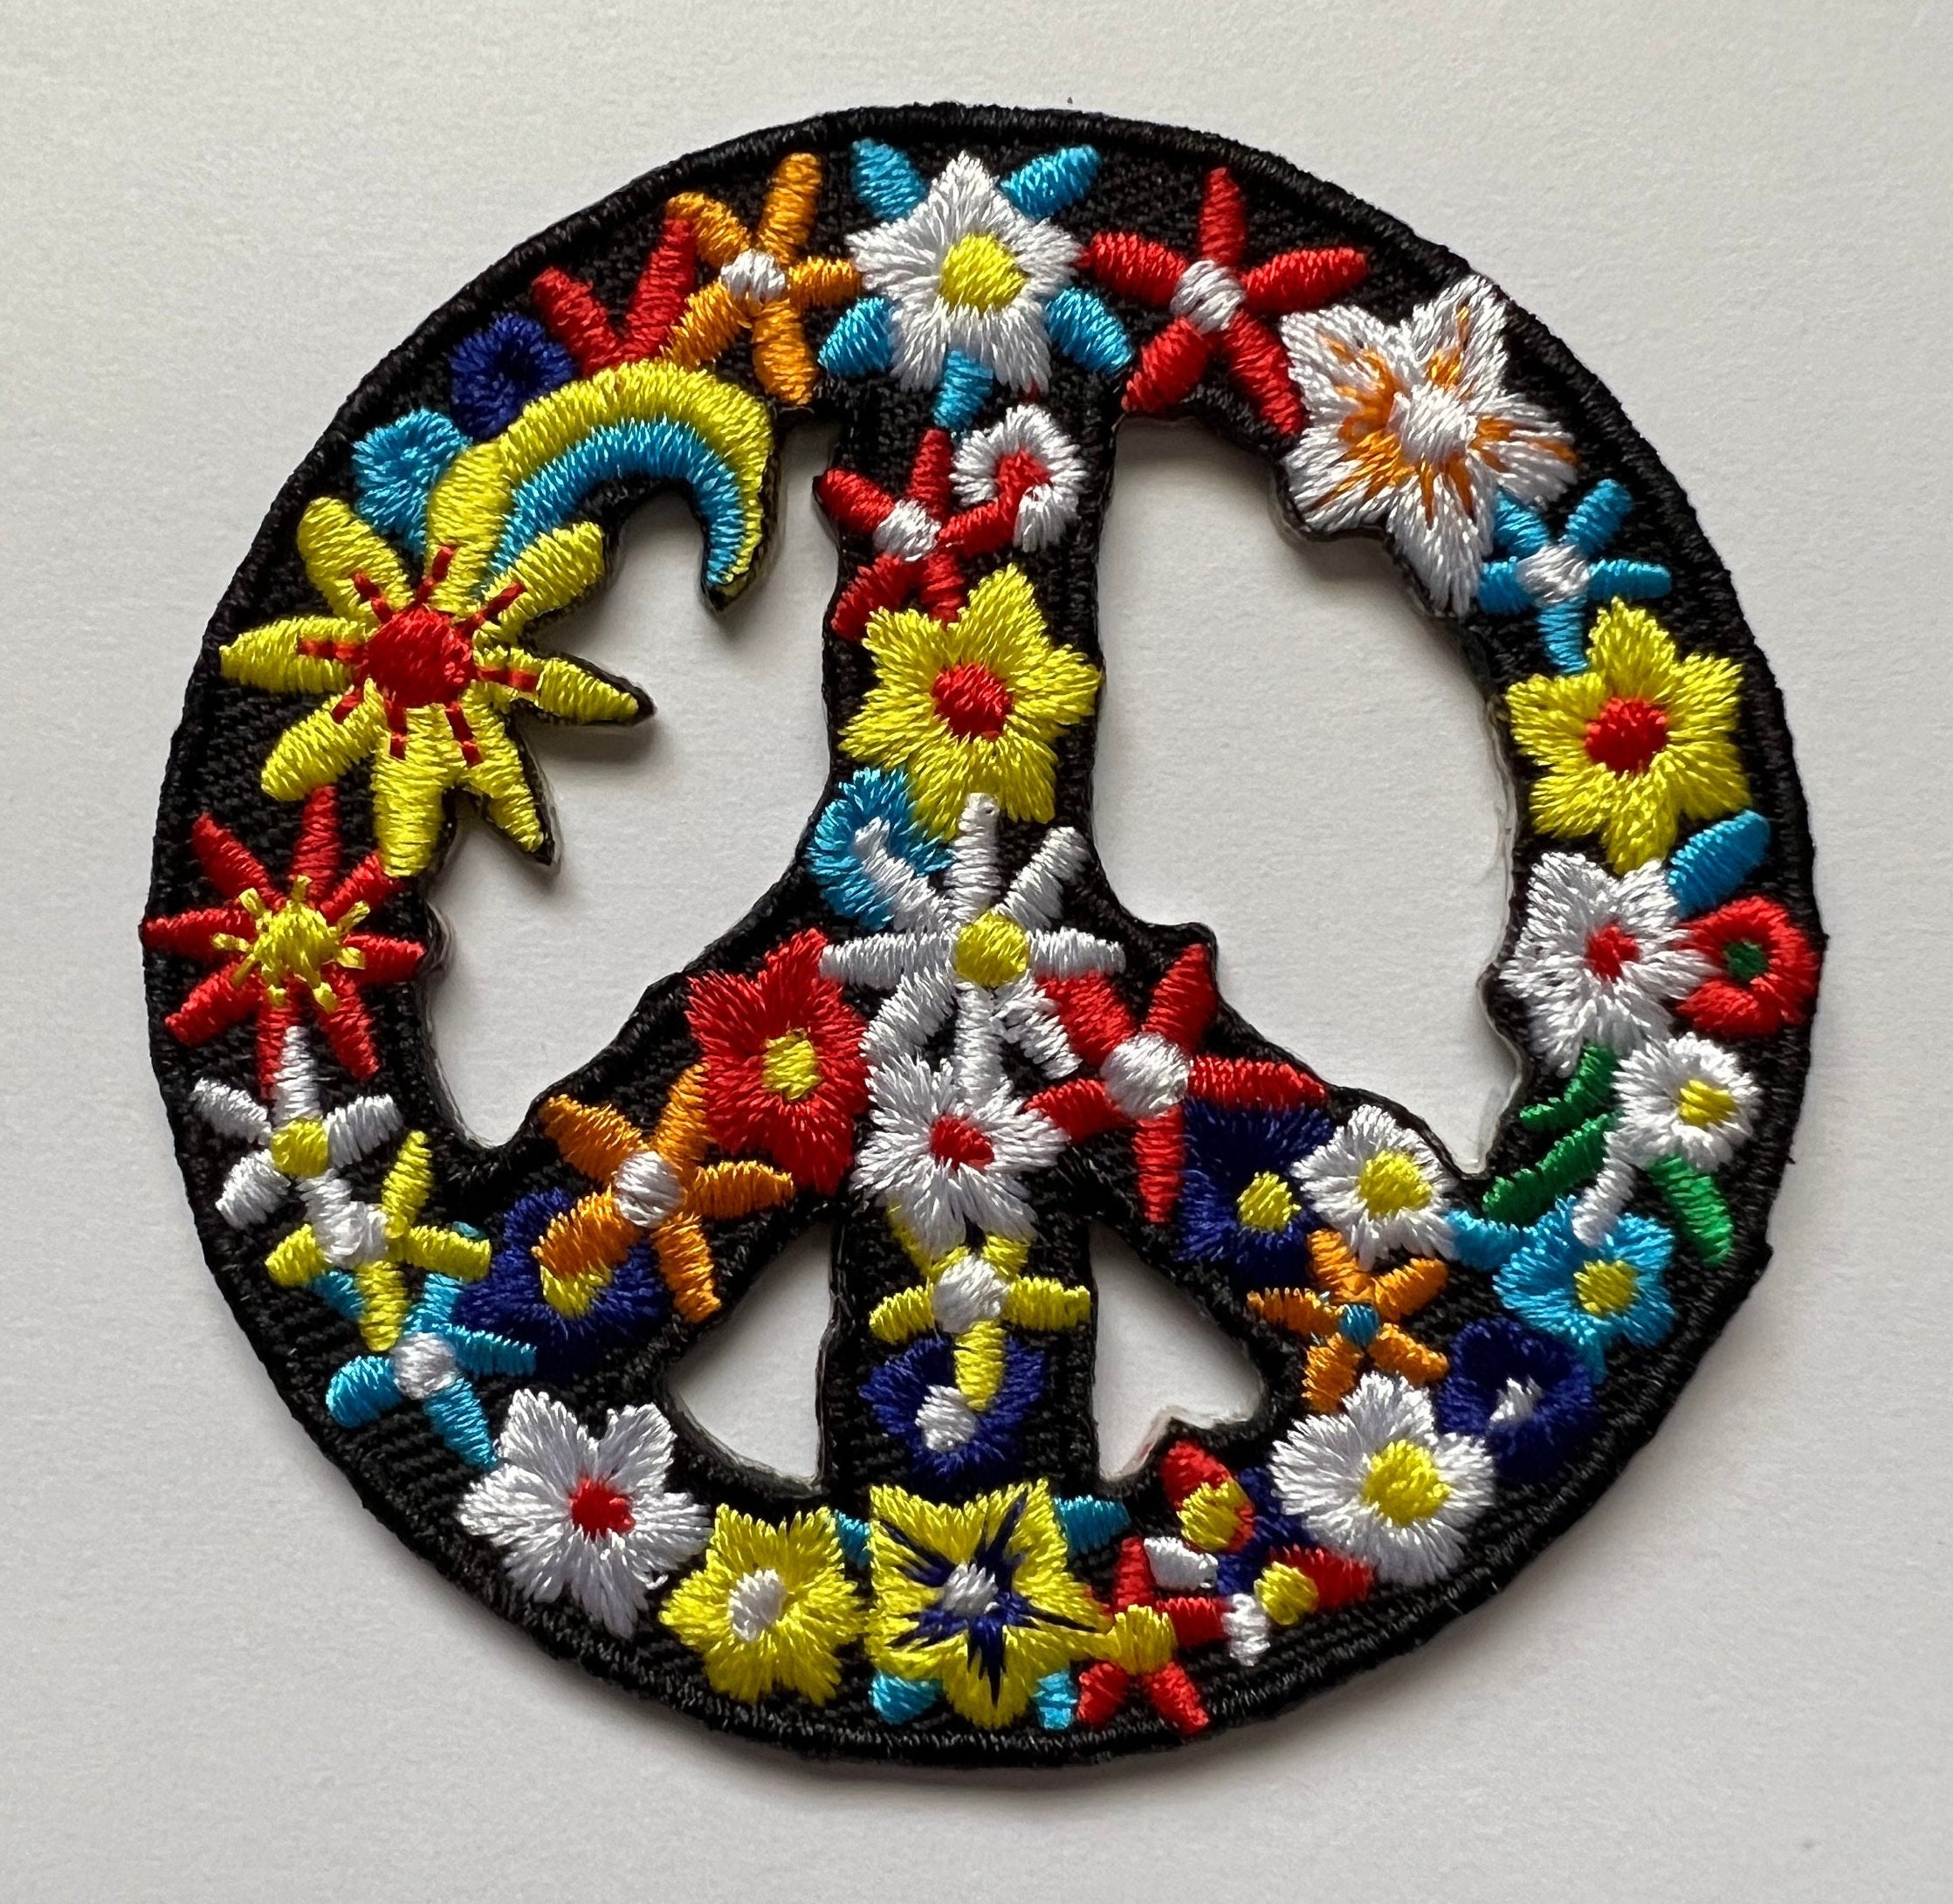 Embroidered Iron-On Peace Sign USA Patch – Shirts Patches And More